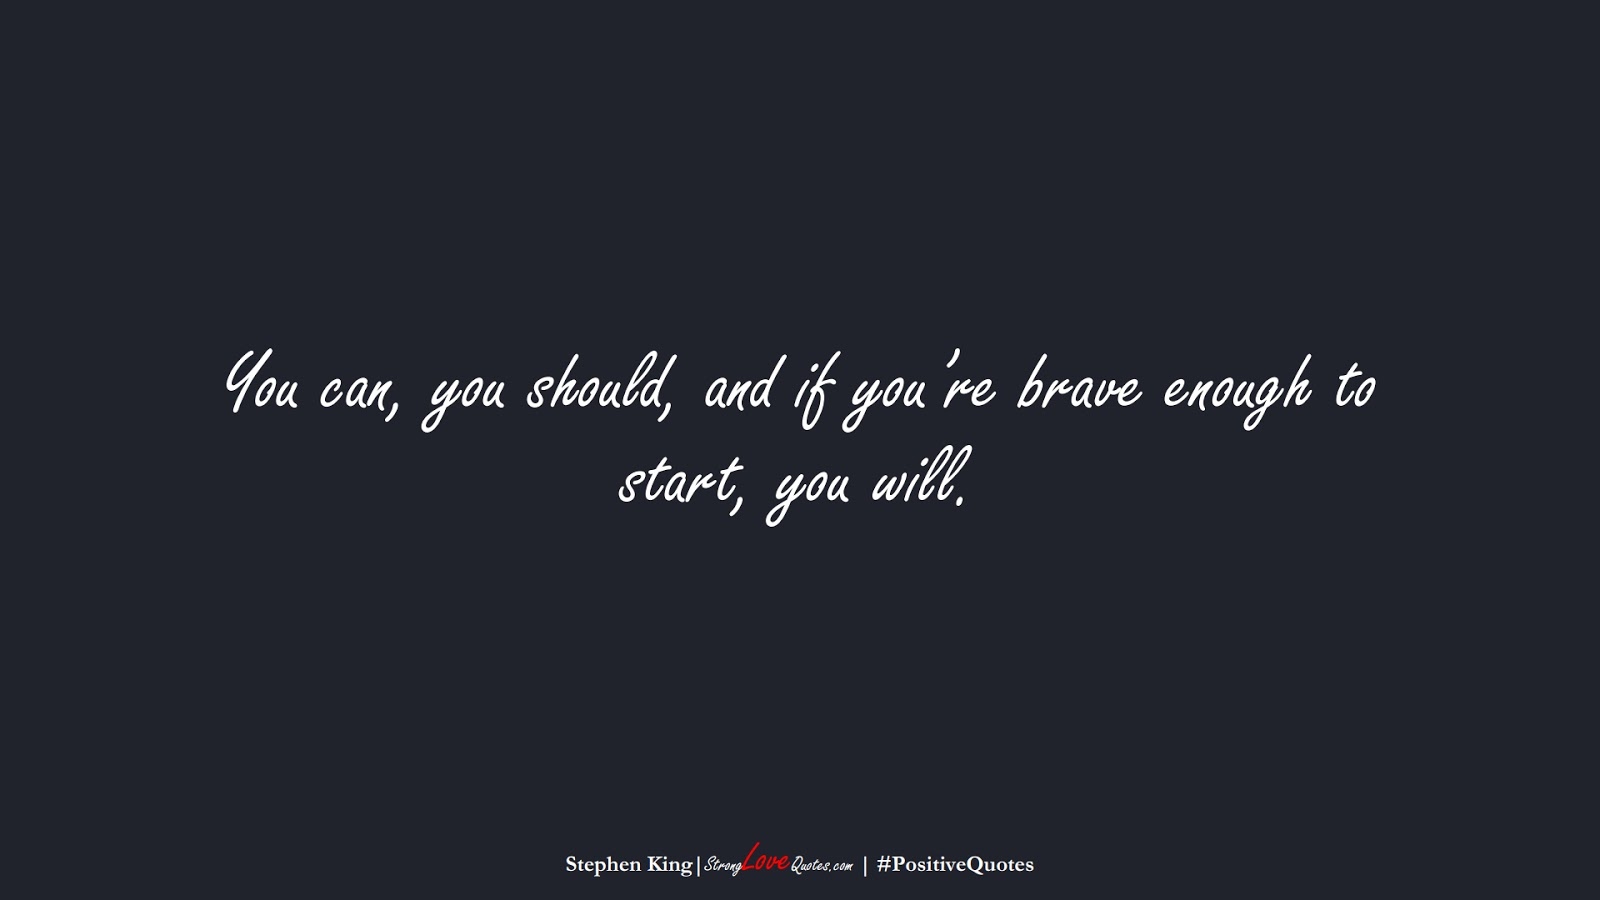 You can, you should, and if you’re brave enough to start, you will. (Stephen King);  #PositiveQuotes